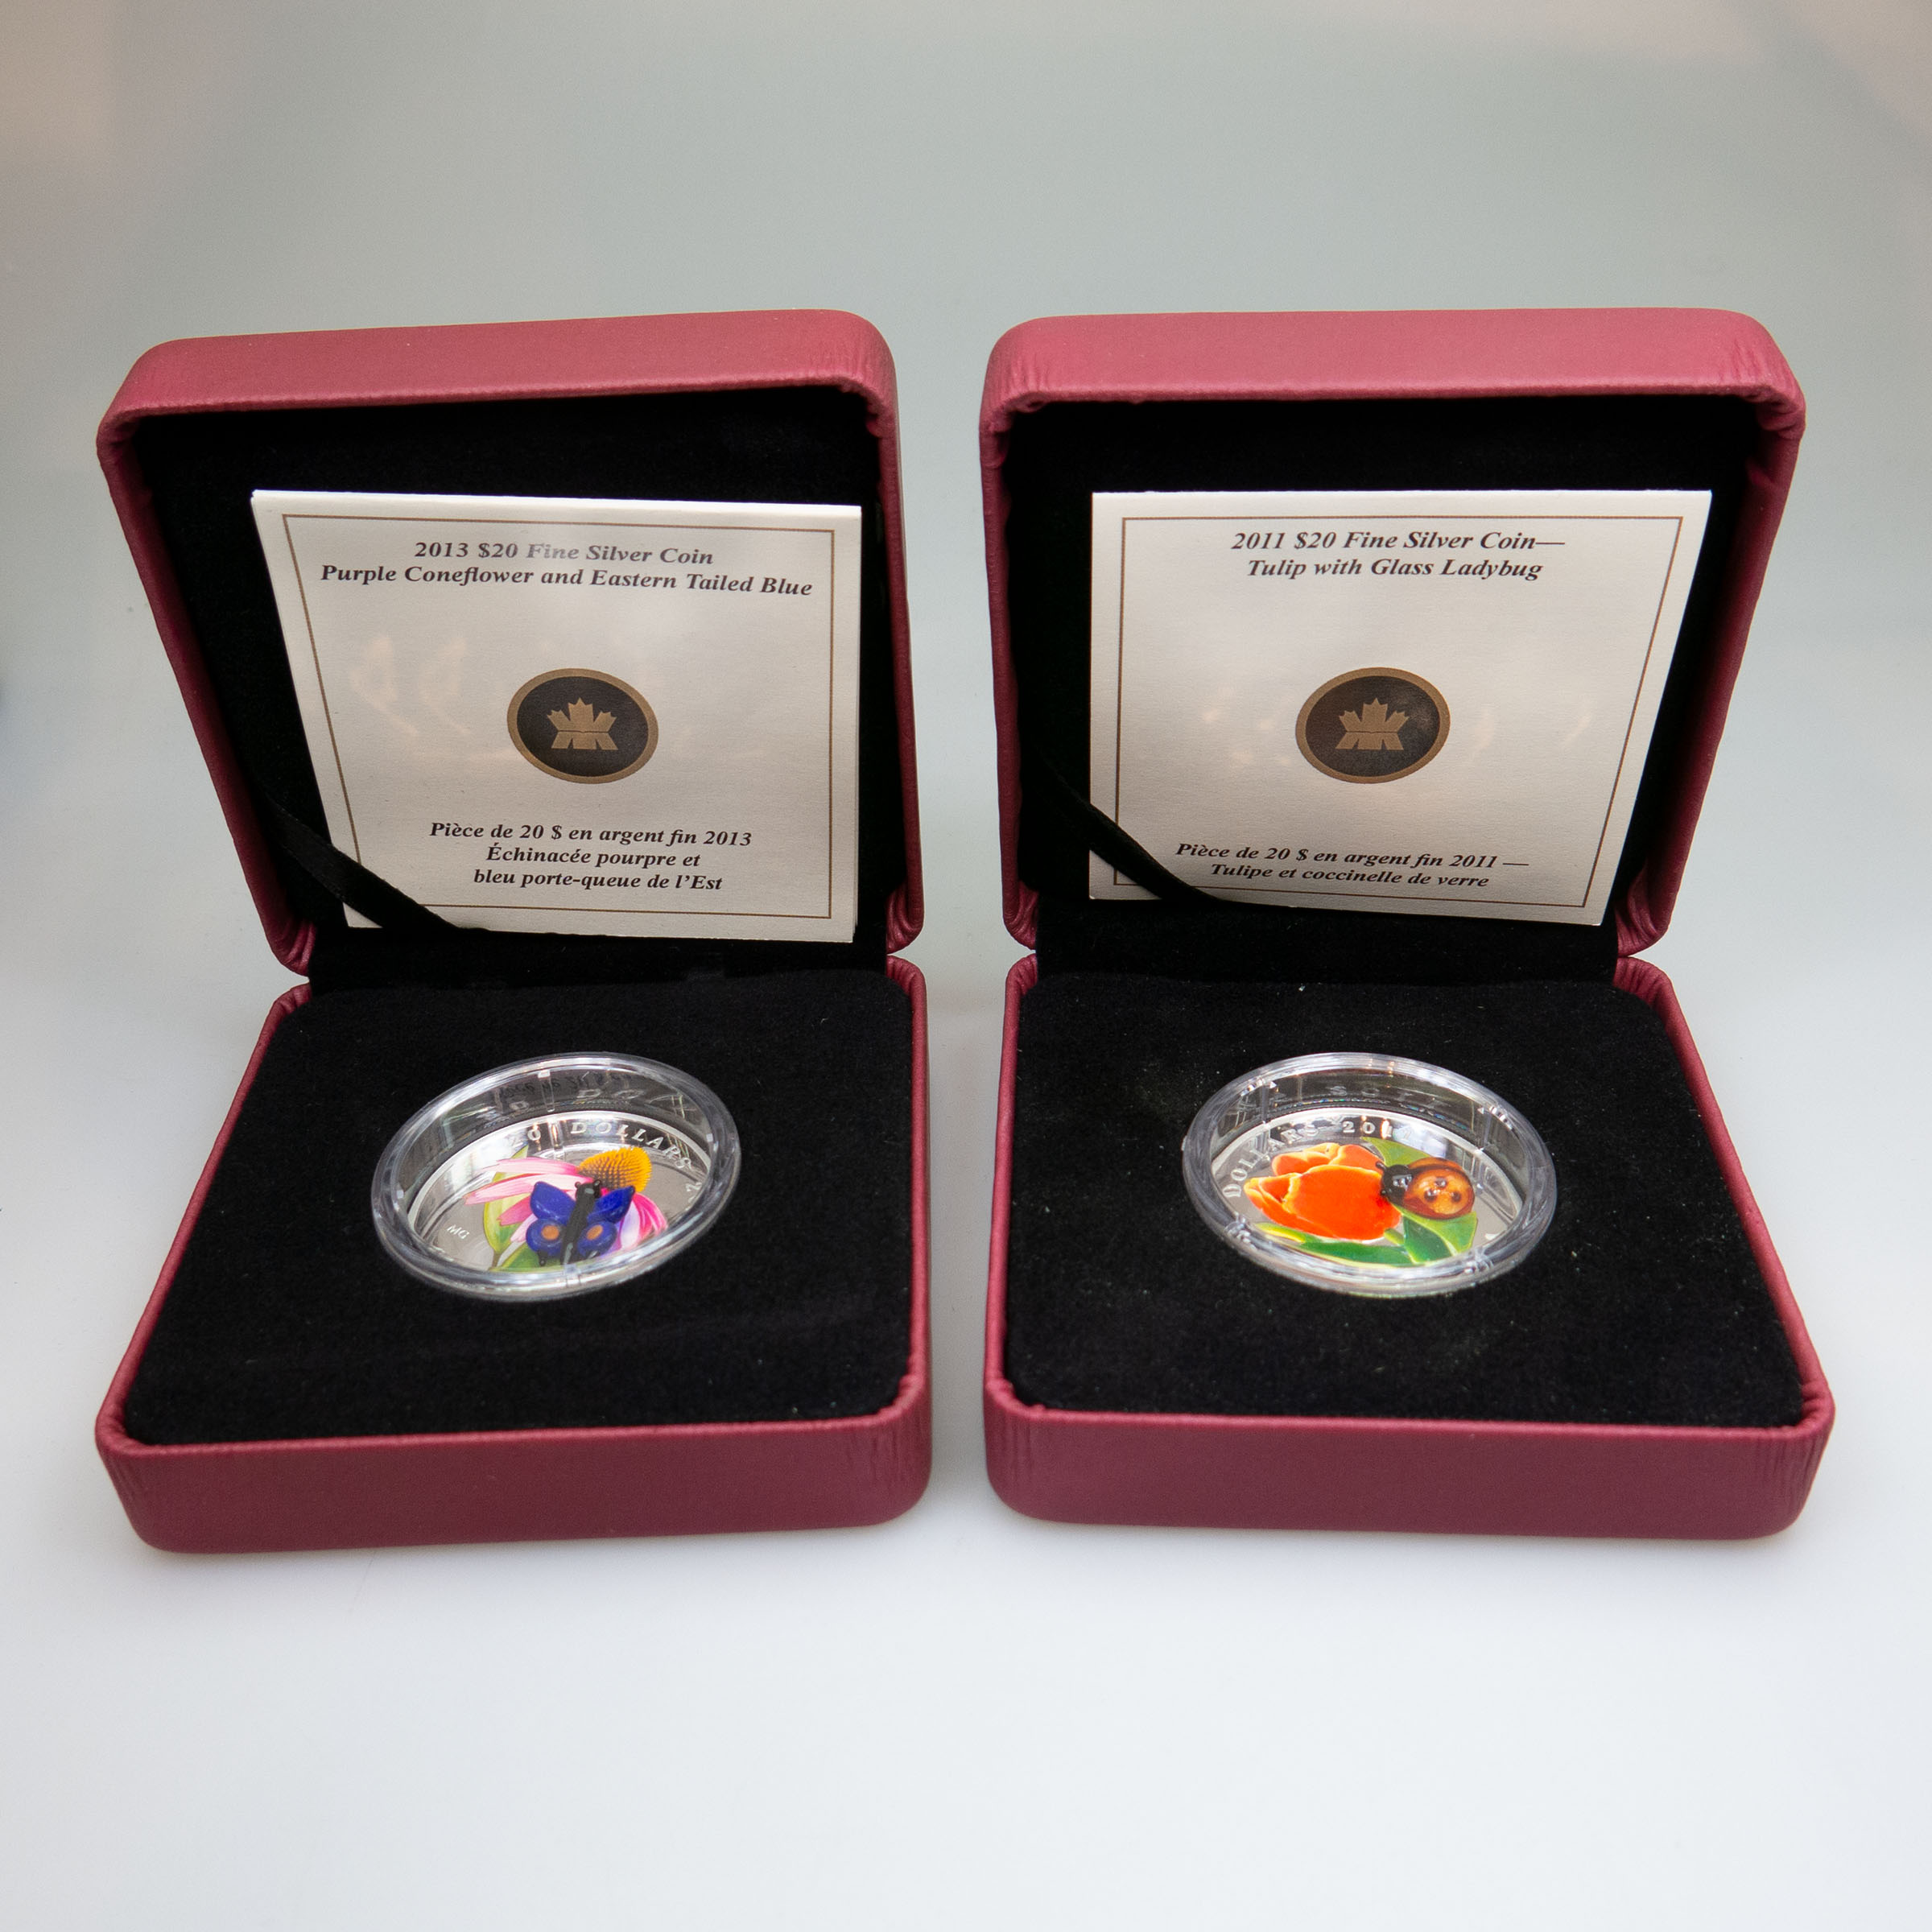 4 Canadian Limited Edition $20 Commemorative One Ounce Silver Coins